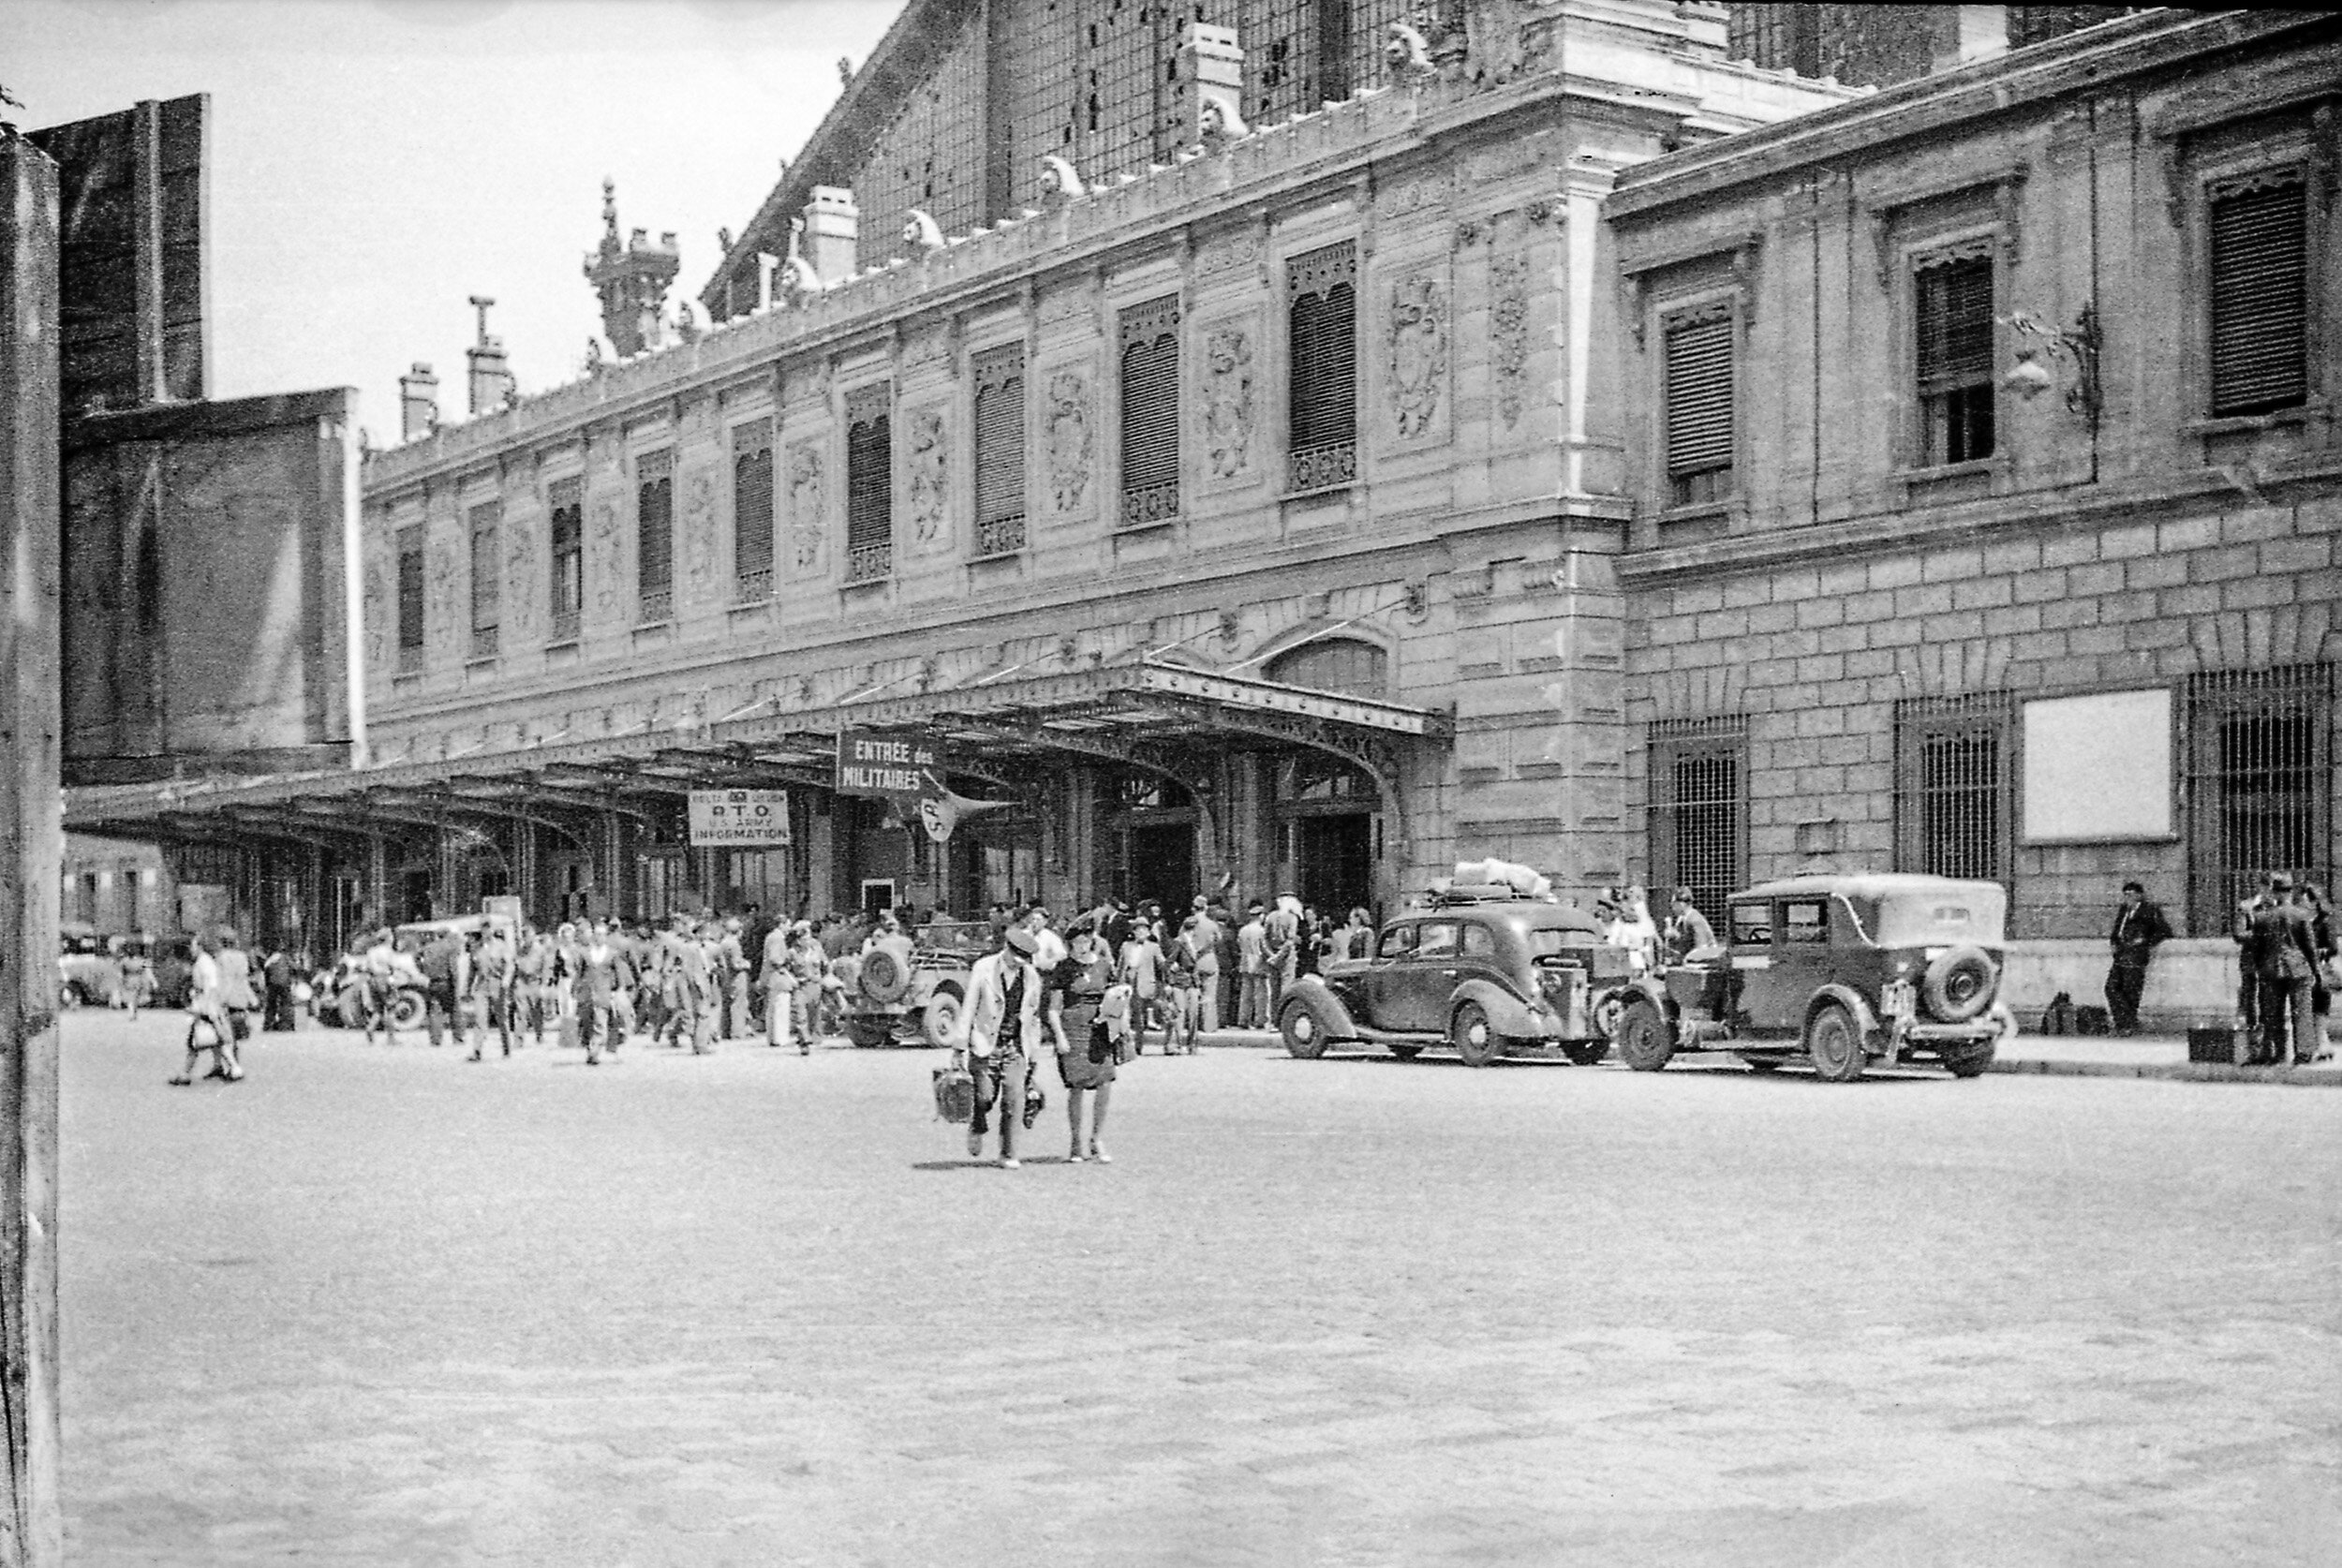 St. Charles Train Station in WWII